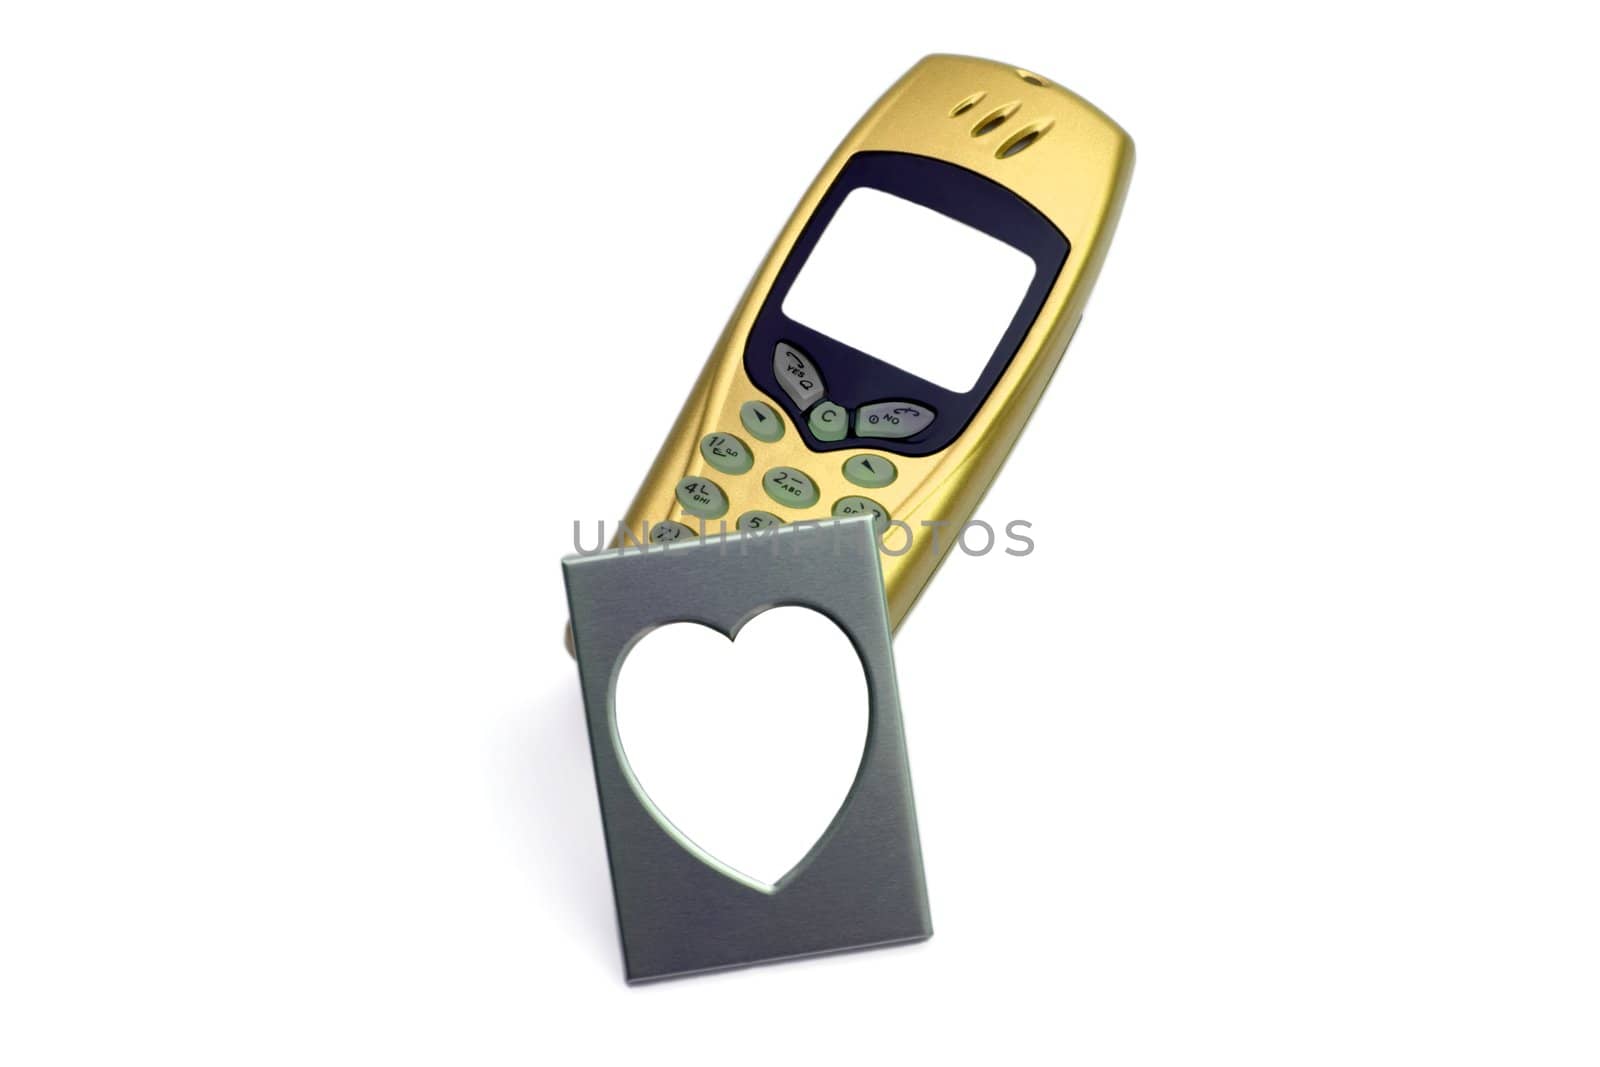 Golden telephone with photo Frame in the manner of heart,isolated in white background.